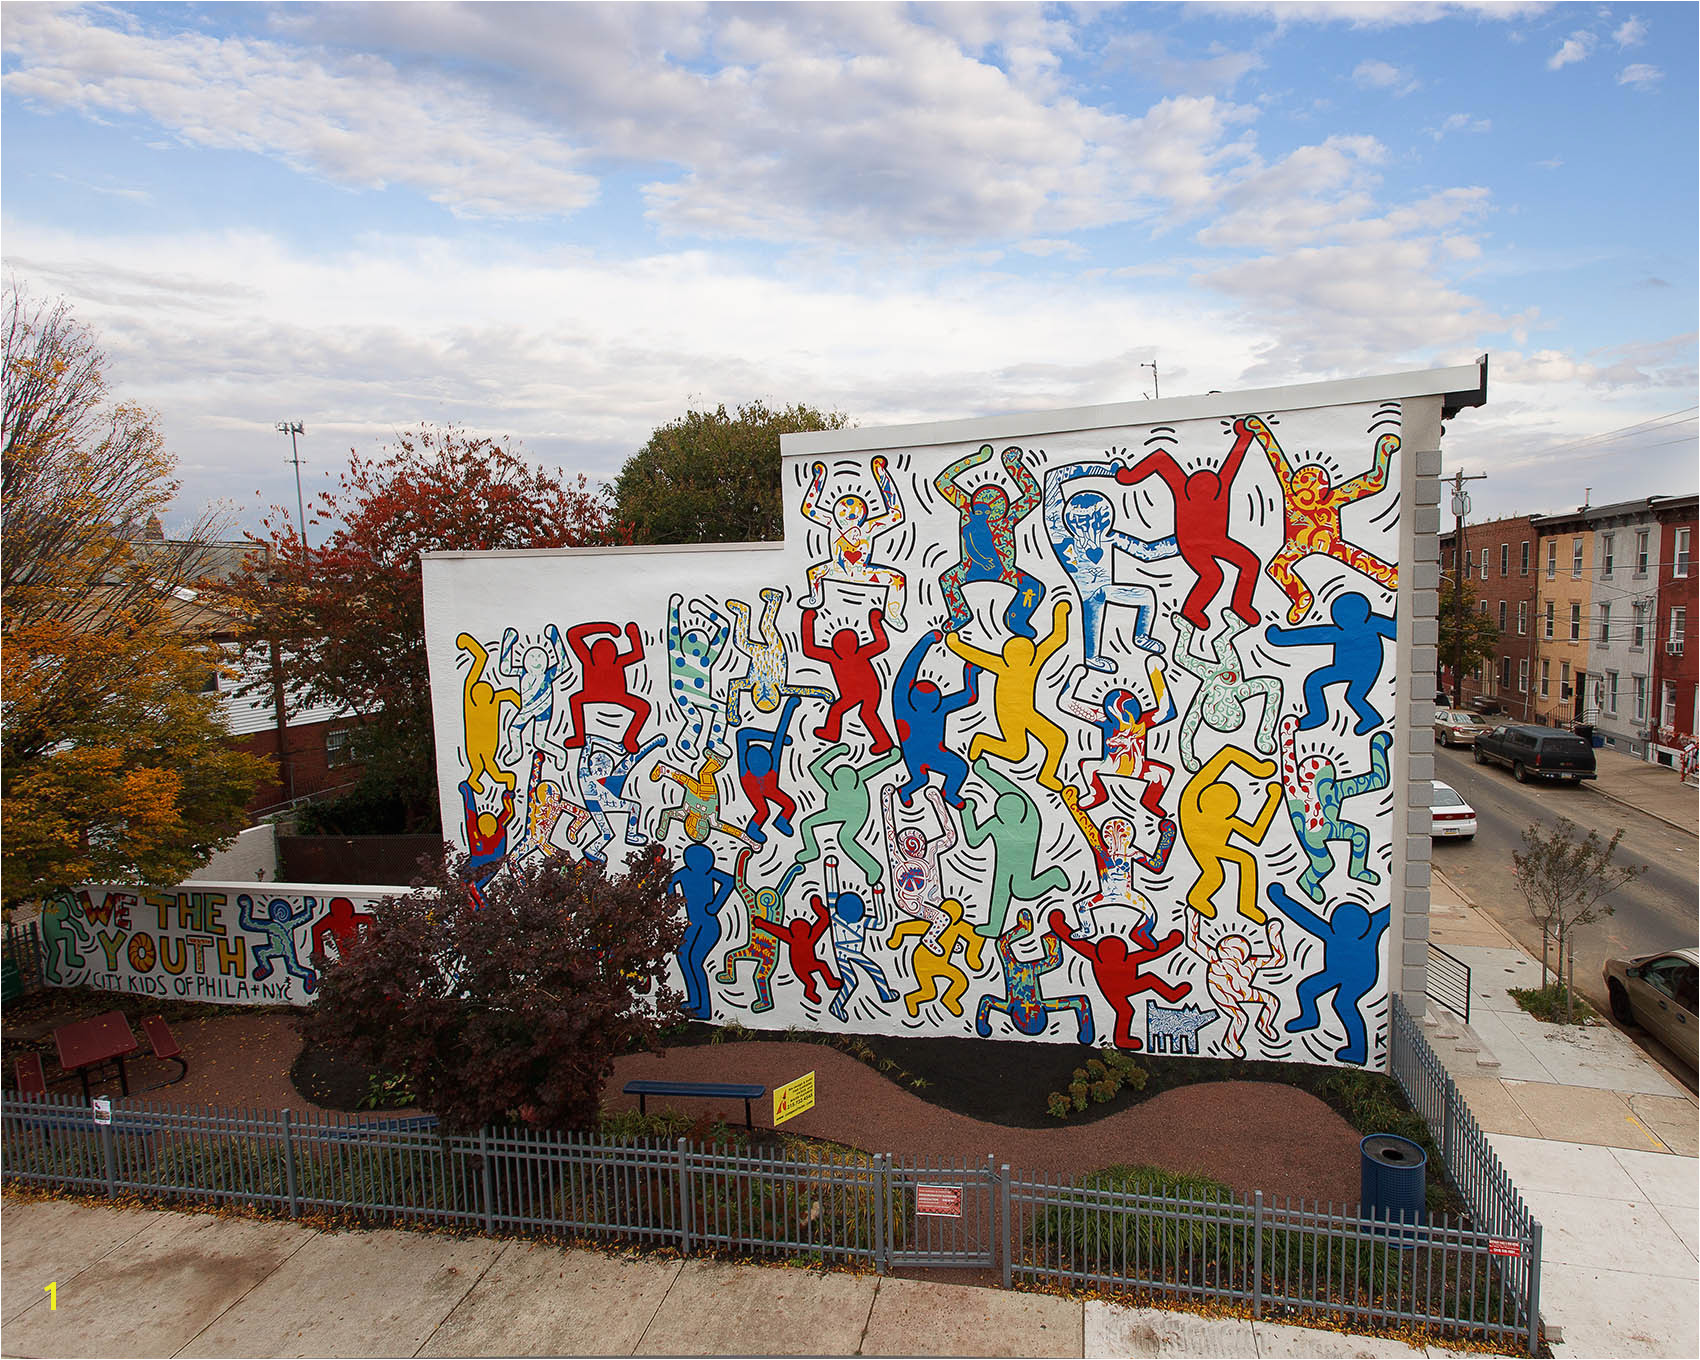 Originally created in 1987 We the Youth is the only Keith Haring collaborative public mural remaining intact and on its original site artist Keith Haring